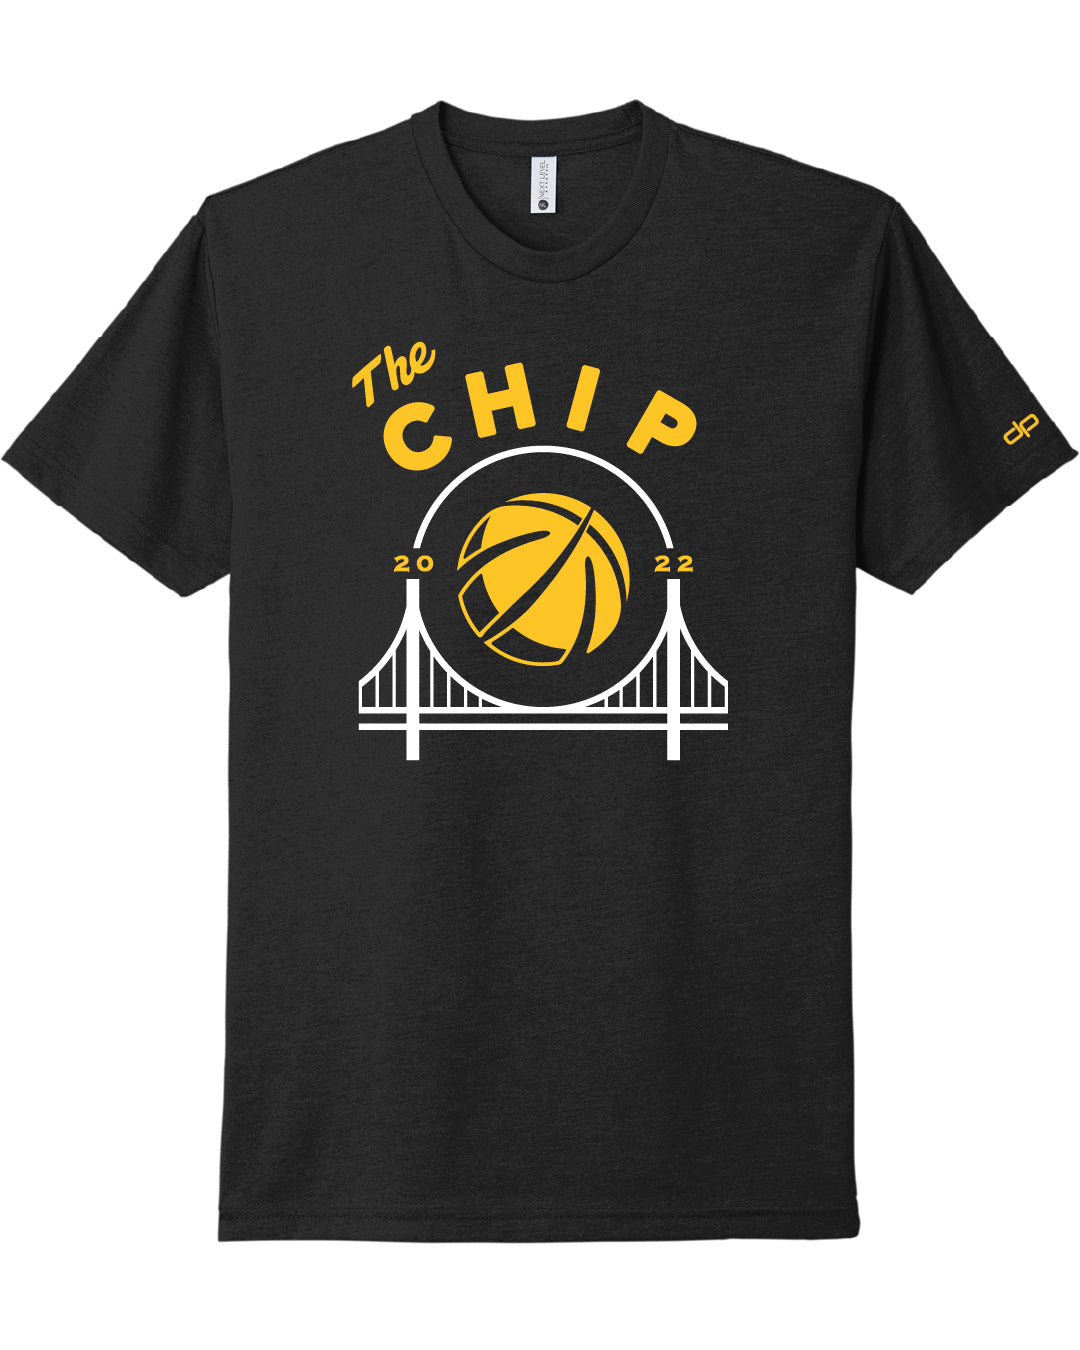 The Chip T-Shirt